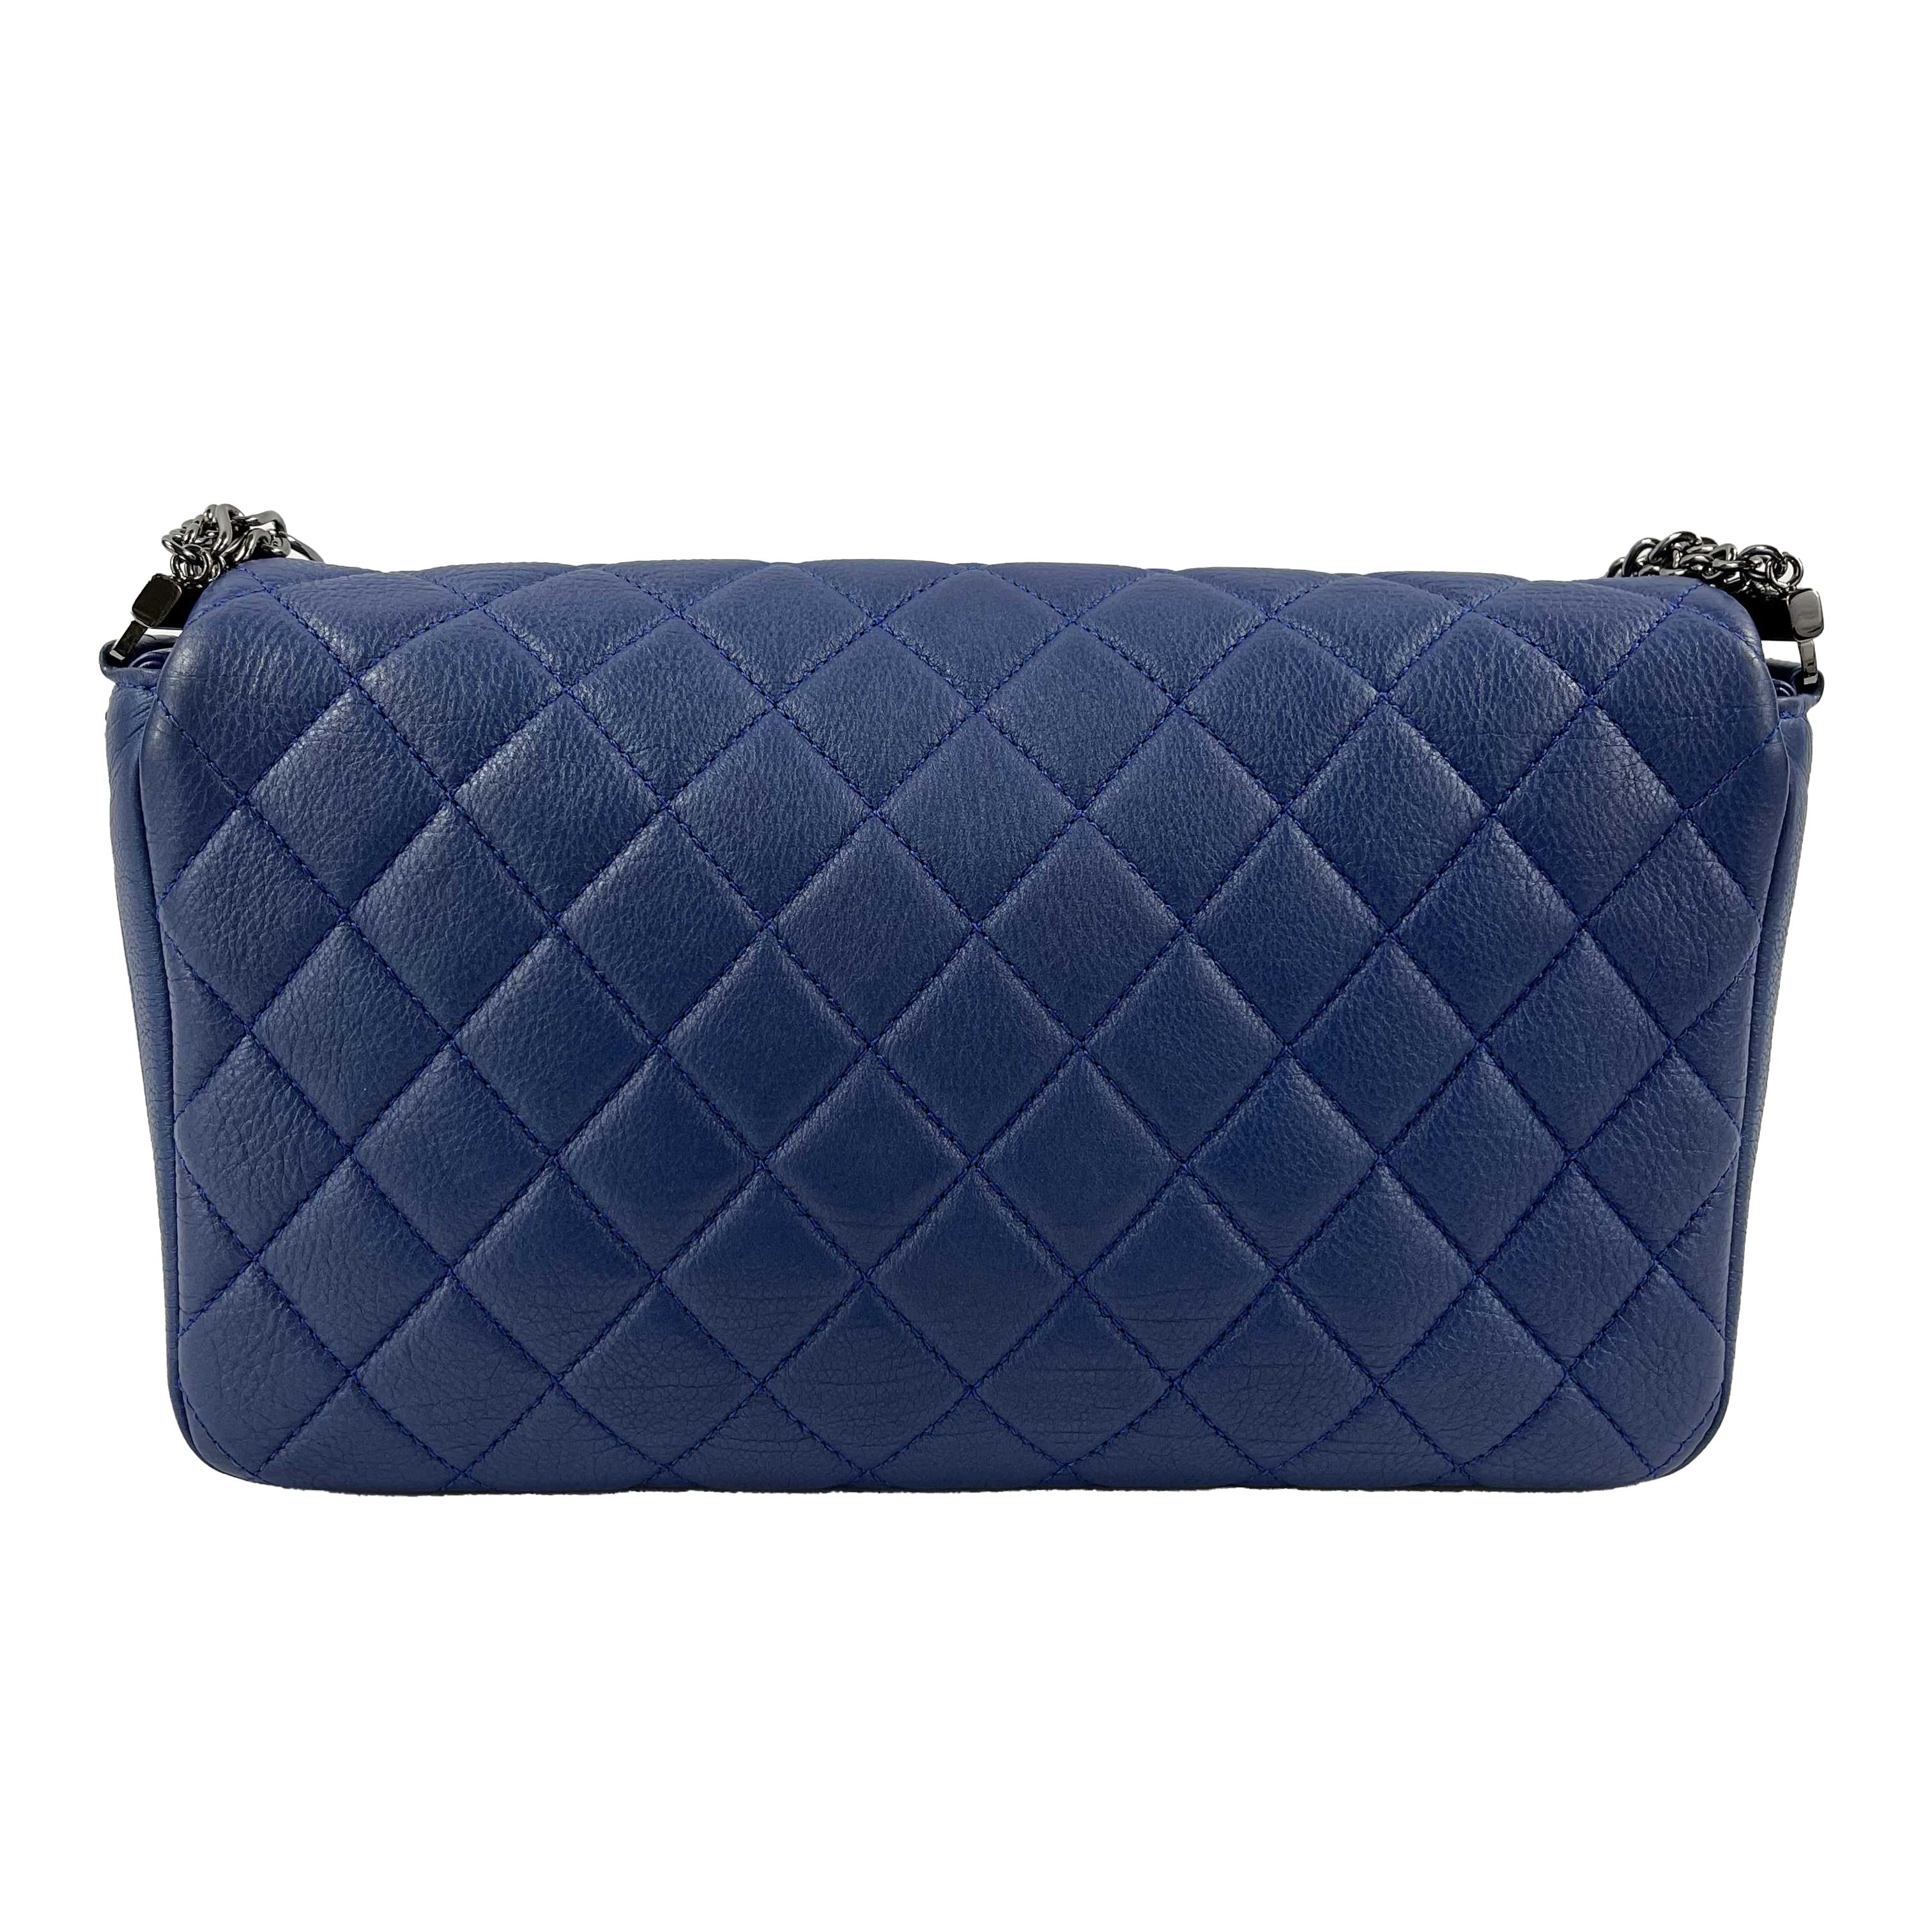 CHANEL - Quilted Leather Medium Single Flap Blue / Ruthenium Shoulder Bag 

Description

From the 2014 collection.
This Chanel flap bag is crafted with blue calfskin leather.
It features the classic quilted design stitched on the flap and back of